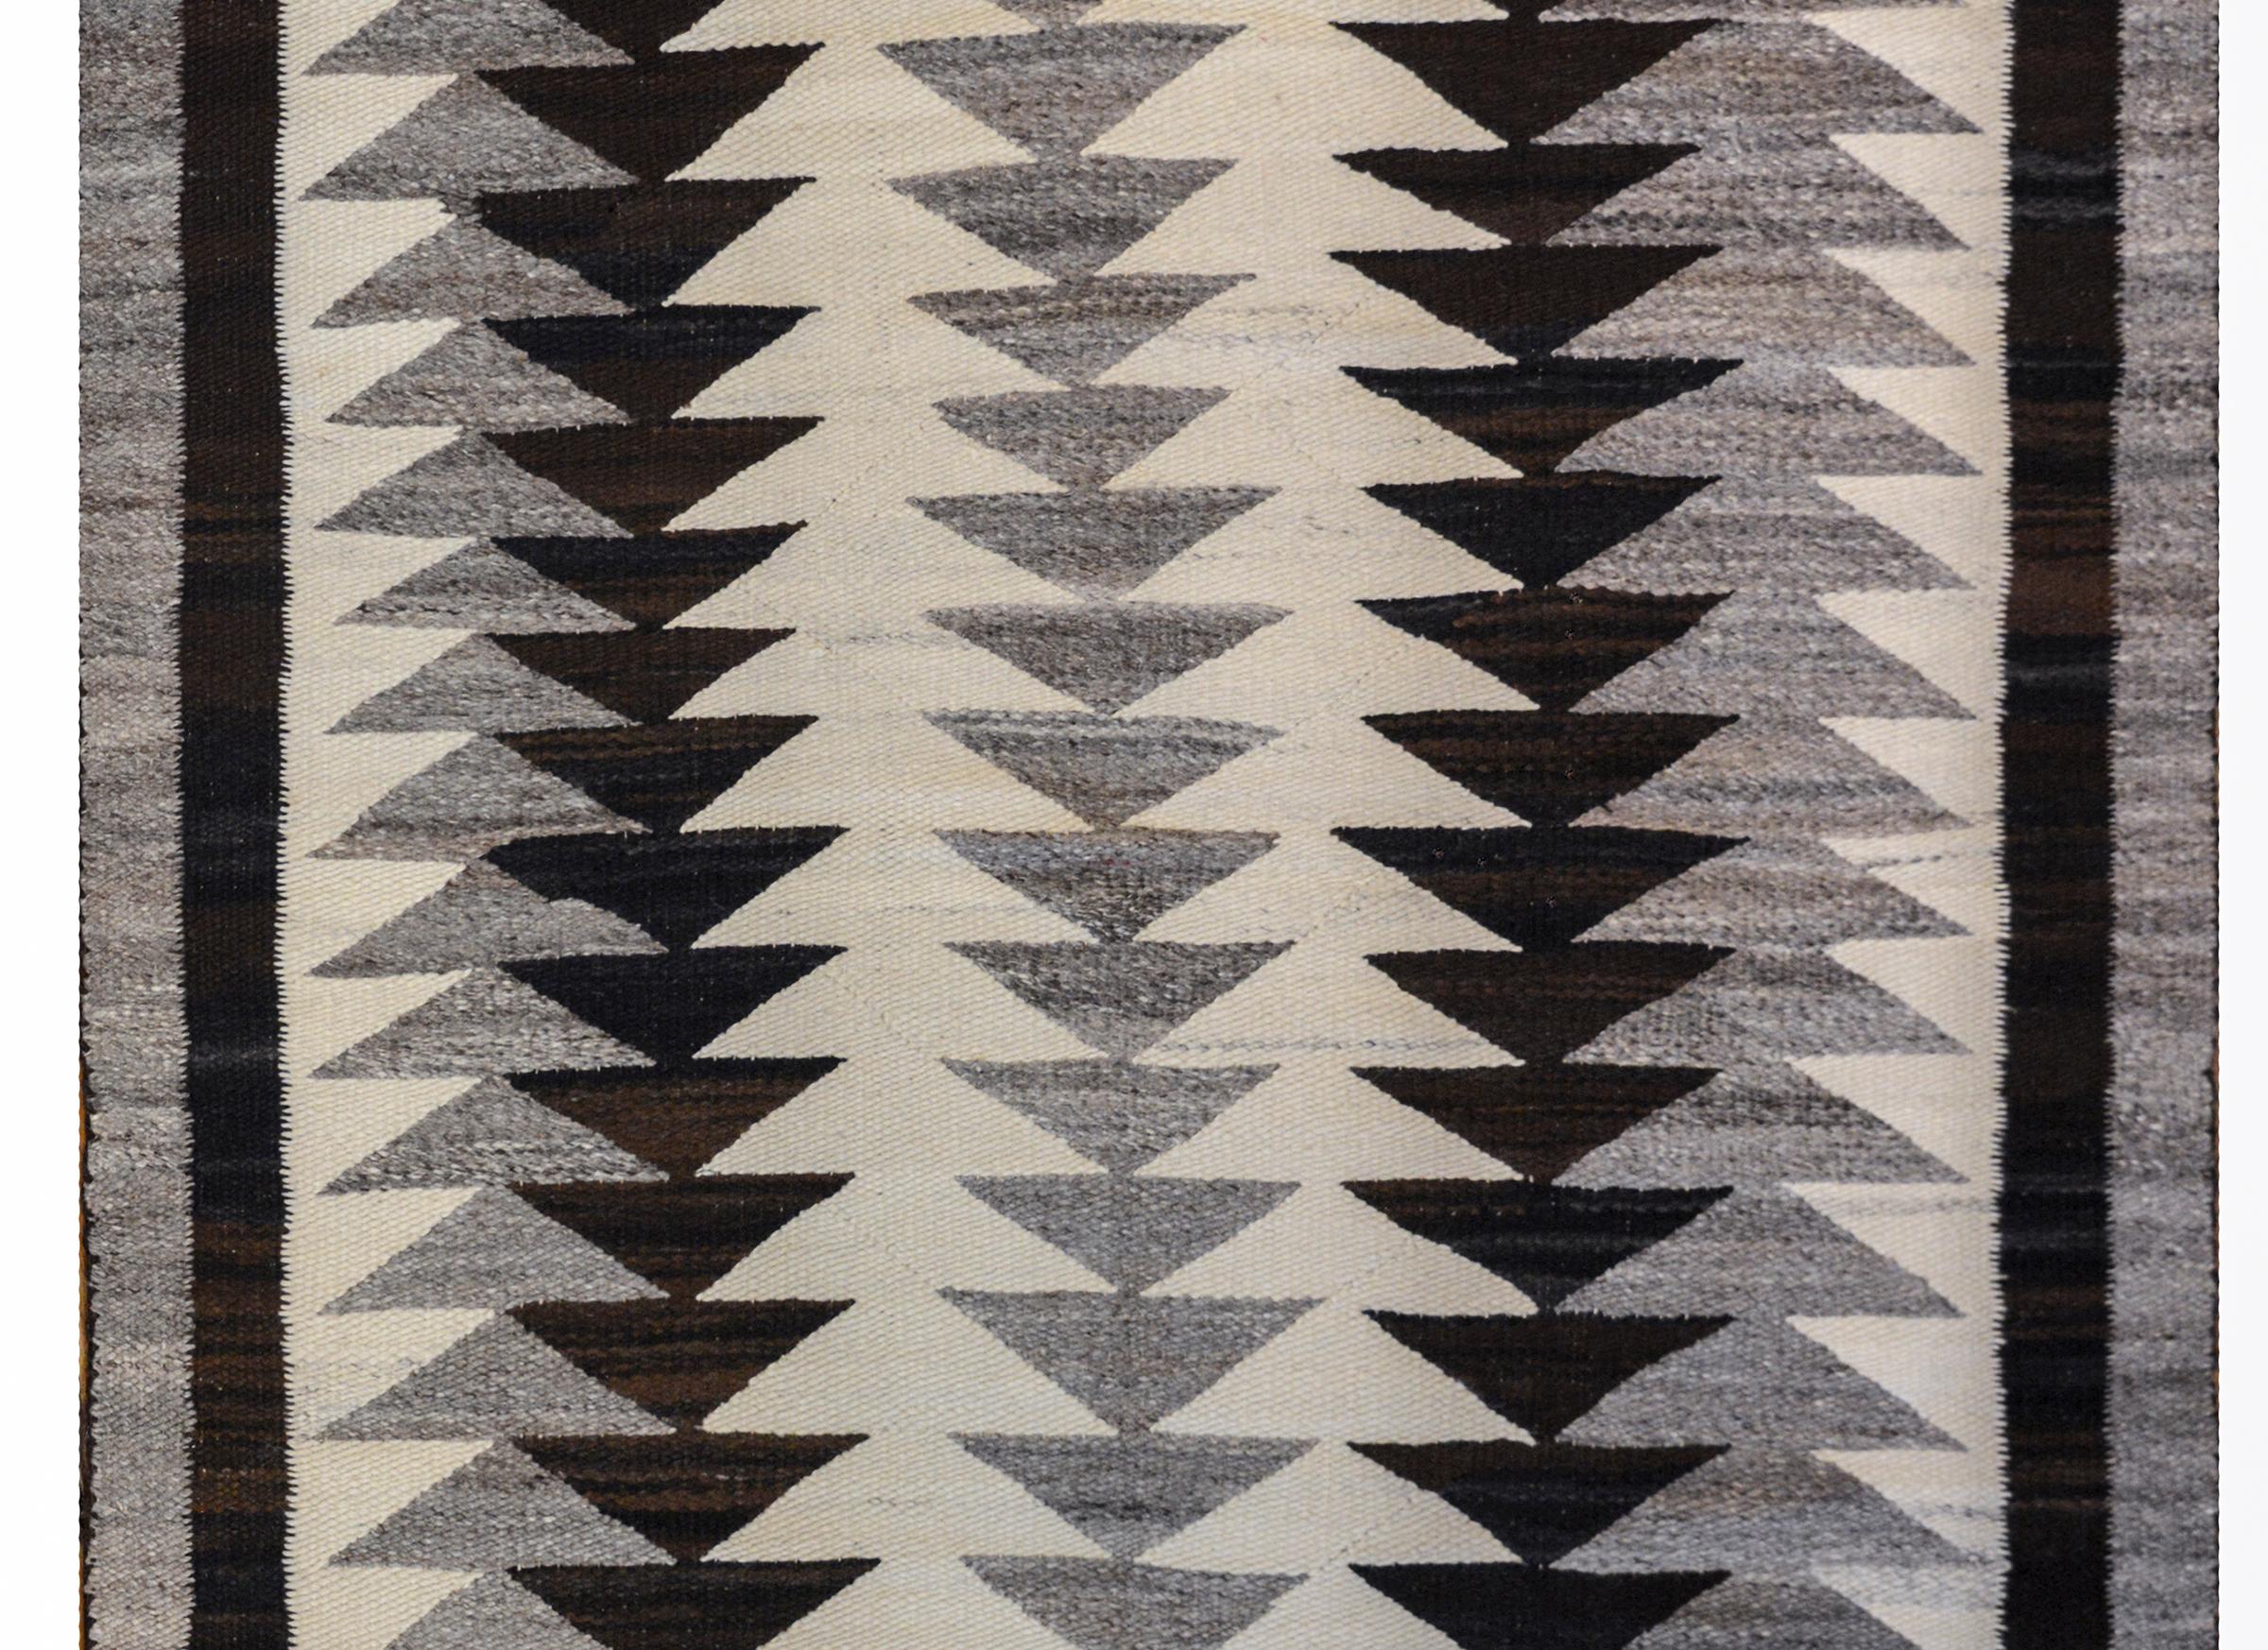 A wonderful early 20th century Navajo rug with an incredible bold black, white, and gray pattern of triangle stripes running the length of the rug.